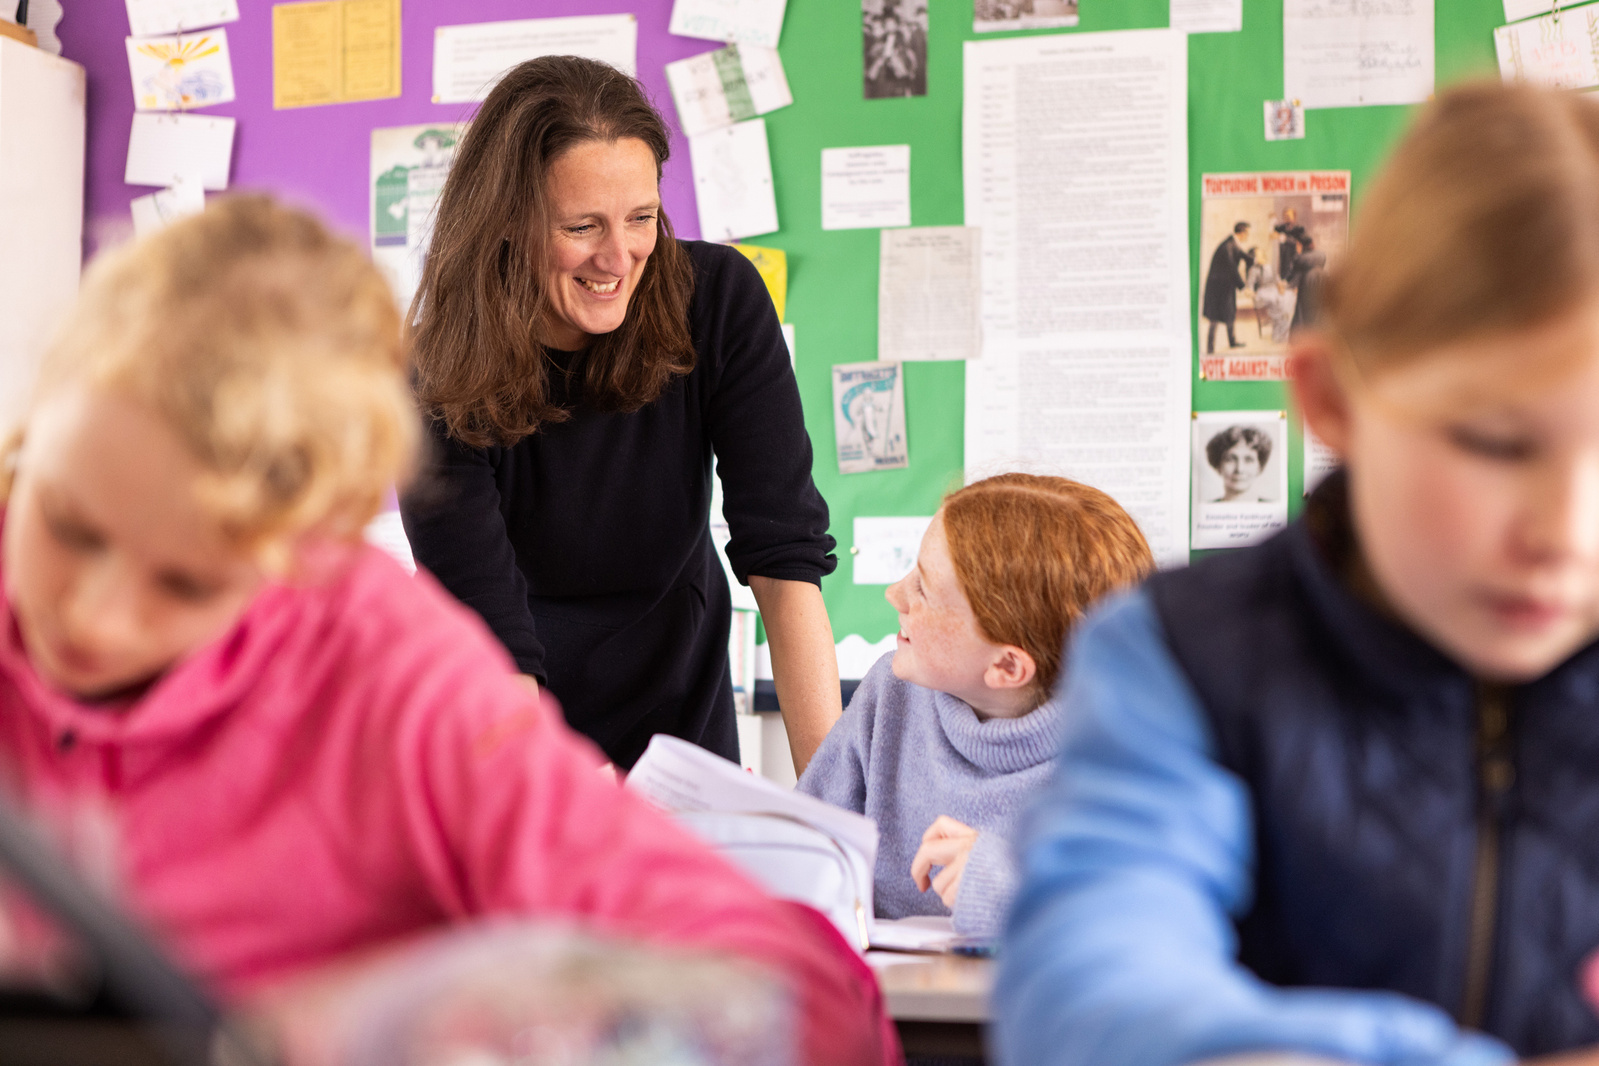 A teacher and a pupil look at each other in an independent school classroom in South England. The teacher is standing over the student and two more students are blurred in the foreground writing.